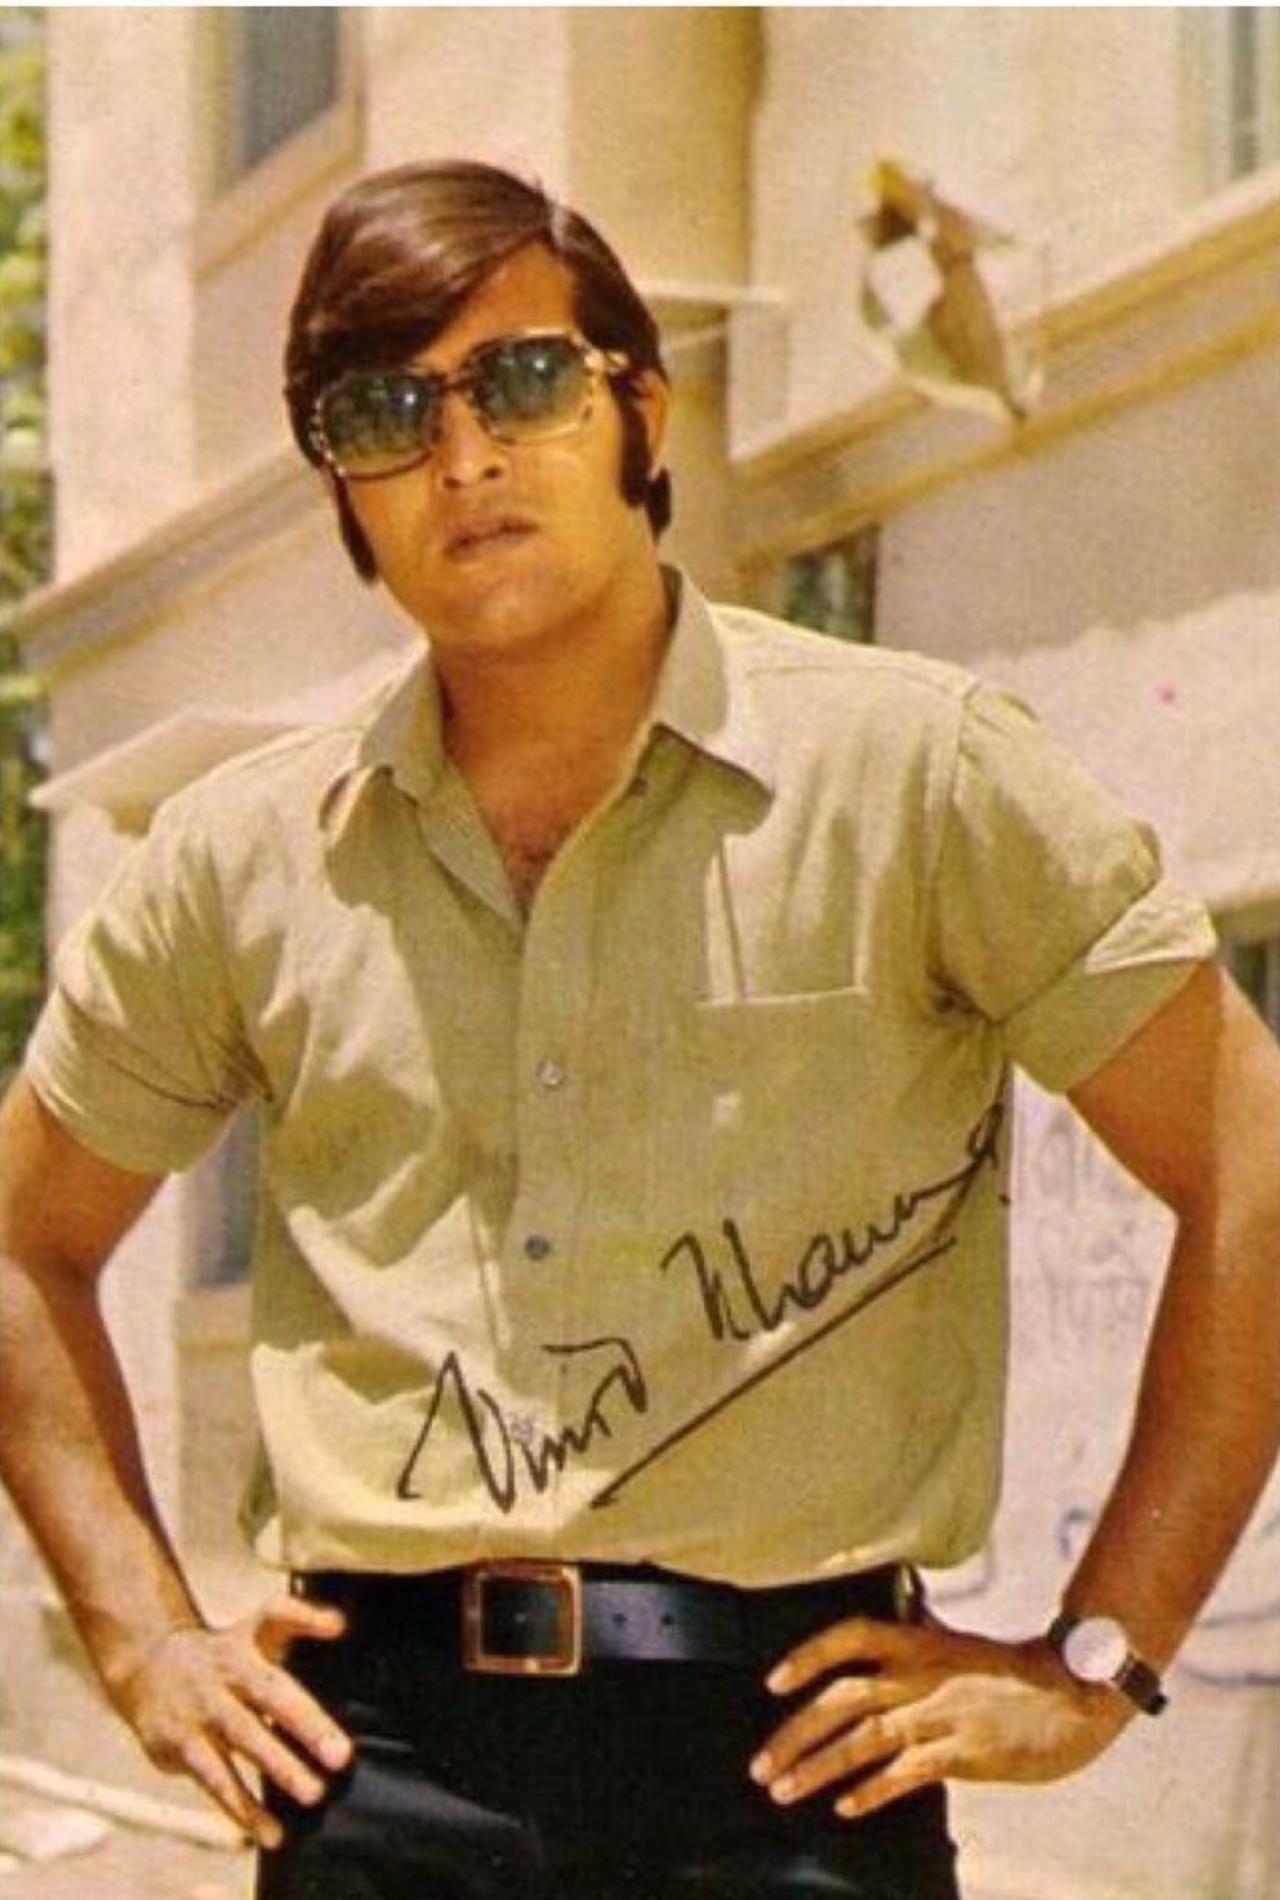 Vinod Khanna is a well known actor and politician. He was among the highest paid stars of his times alongside Amitabh Bachchan and Rajesh Khanna. The actor who started his career in the late 60s has been a part of films like 'Amar Akbar Anthony', 'Khoon Pasina', 'Muqaddar ka Sikandar', 'Insaan', 'Satyamev Jayate', and many more. Of recent times, he has been seen in films like 'Dabangg', 'Dilwale', 'Wanted'.